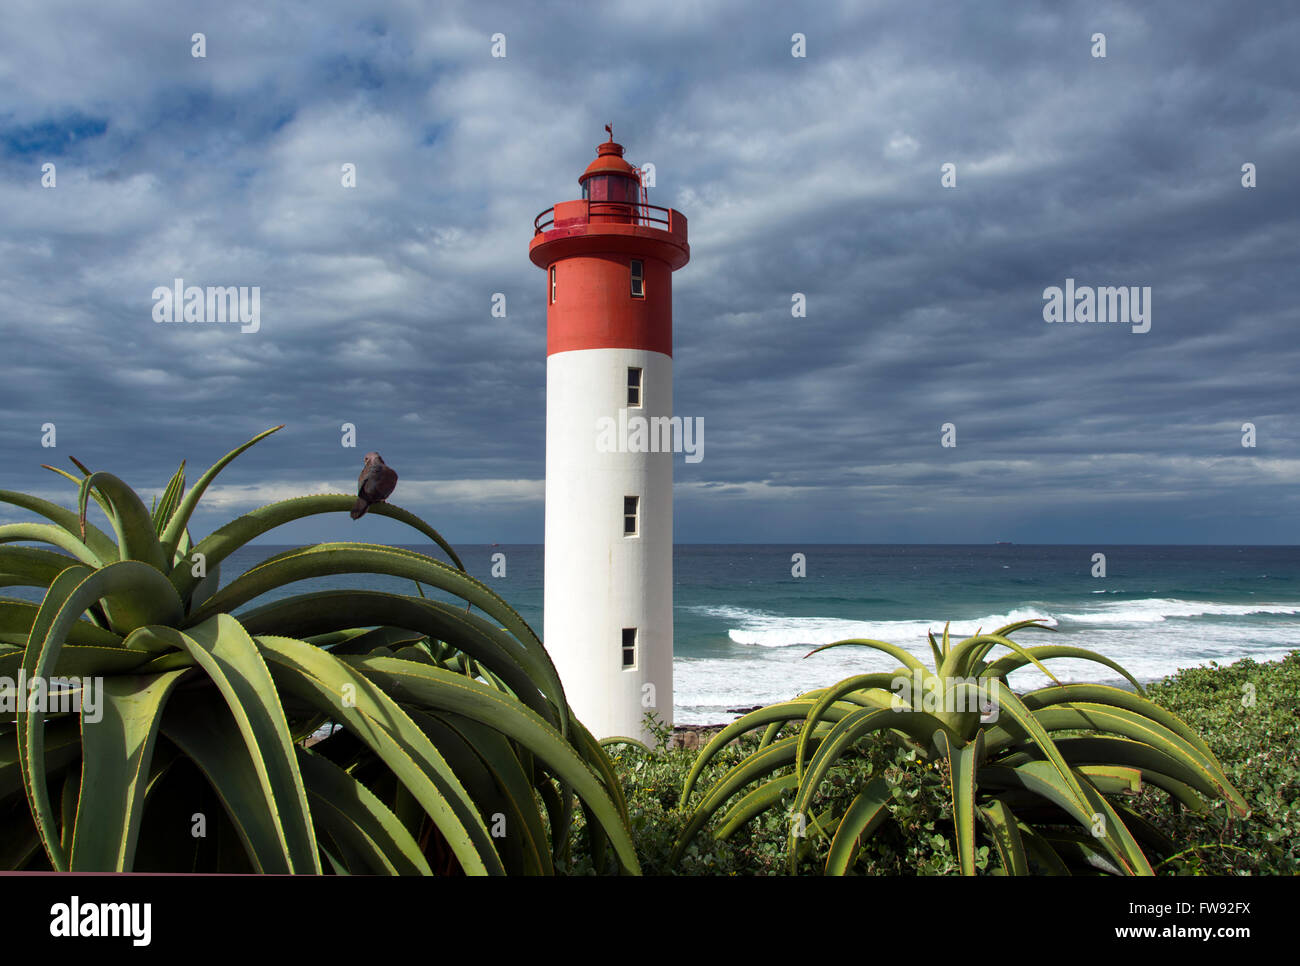 Red and white lighthouse at Umhlanga Rocks, north of Durban in KwaZulu Natal, South Africa. Stock Photo